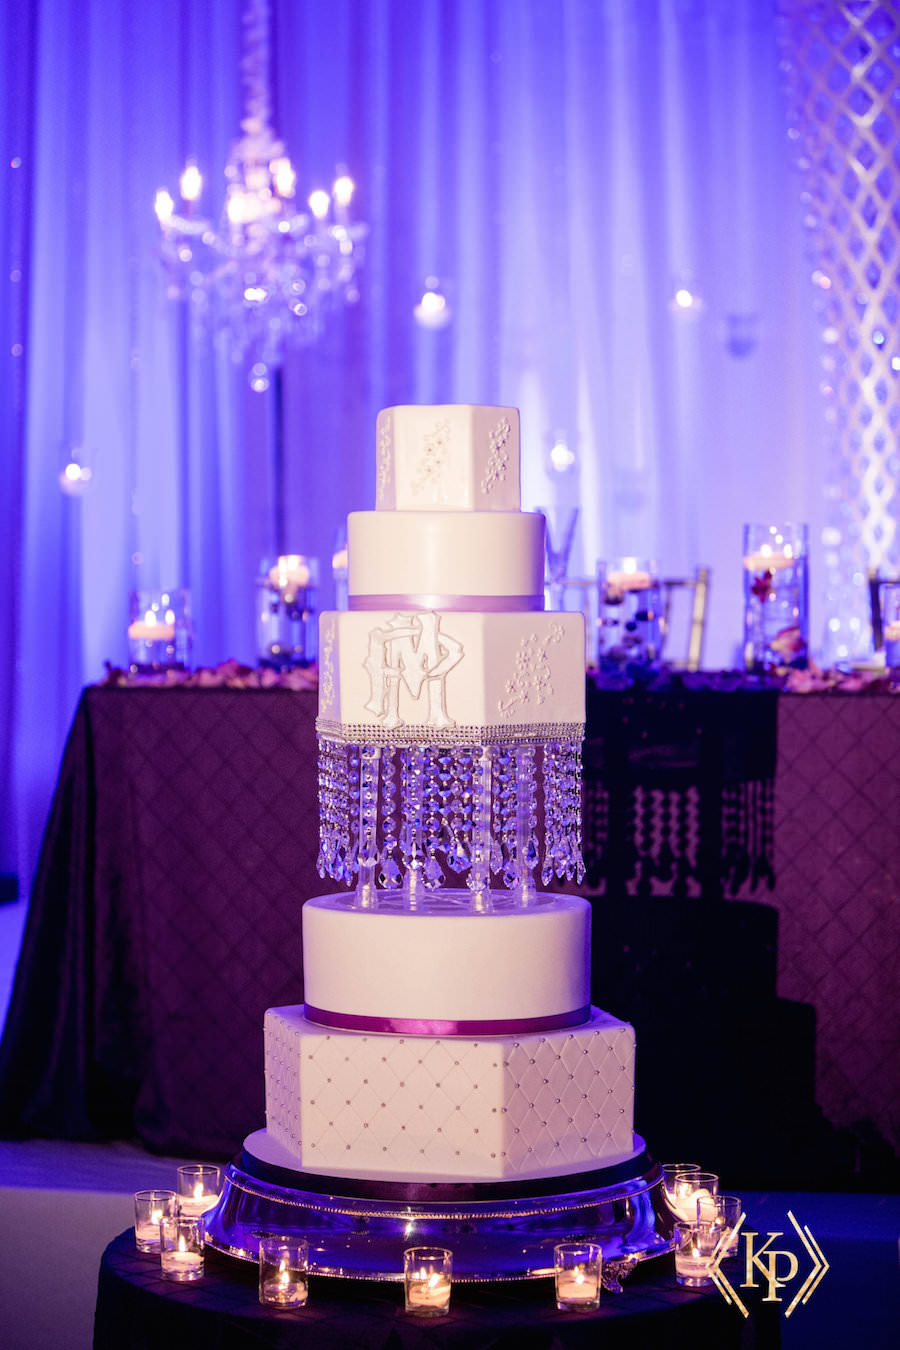 Five Tiered White Geometric Wedding Cake with Monogram and Hanging Decor with Purple Uplight| Tampa Wedding Cakes and Desserts Hands on Sweets